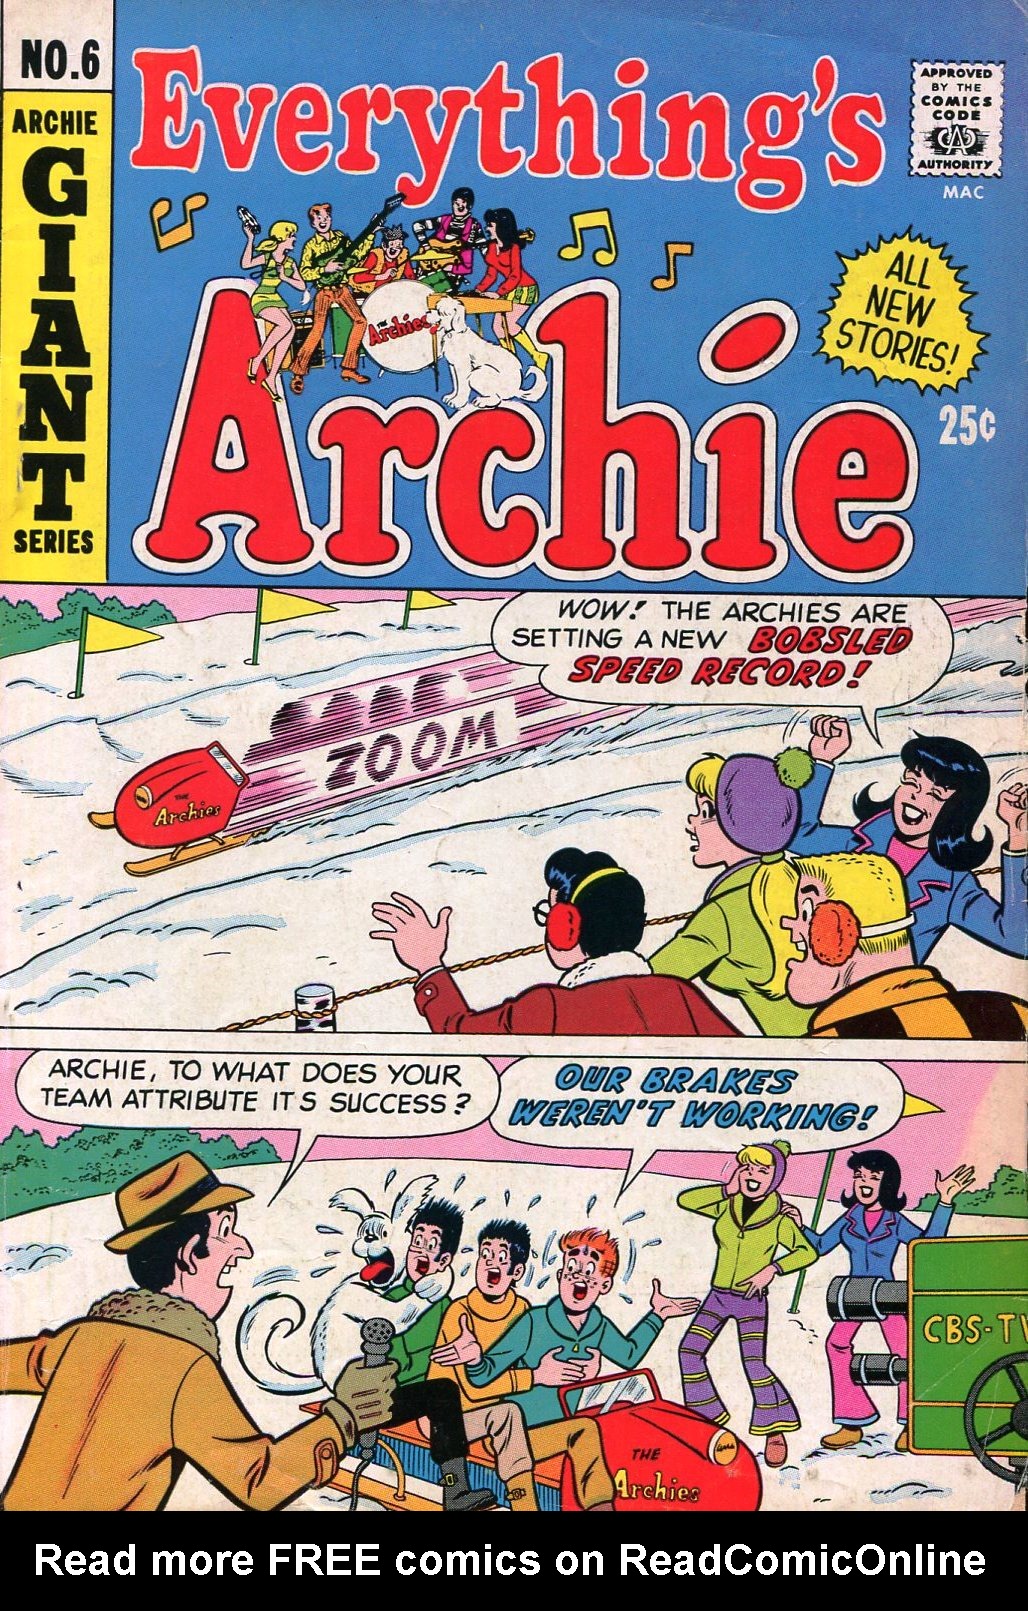 Read online Everything's Archie comic -  Issue #6 - 1